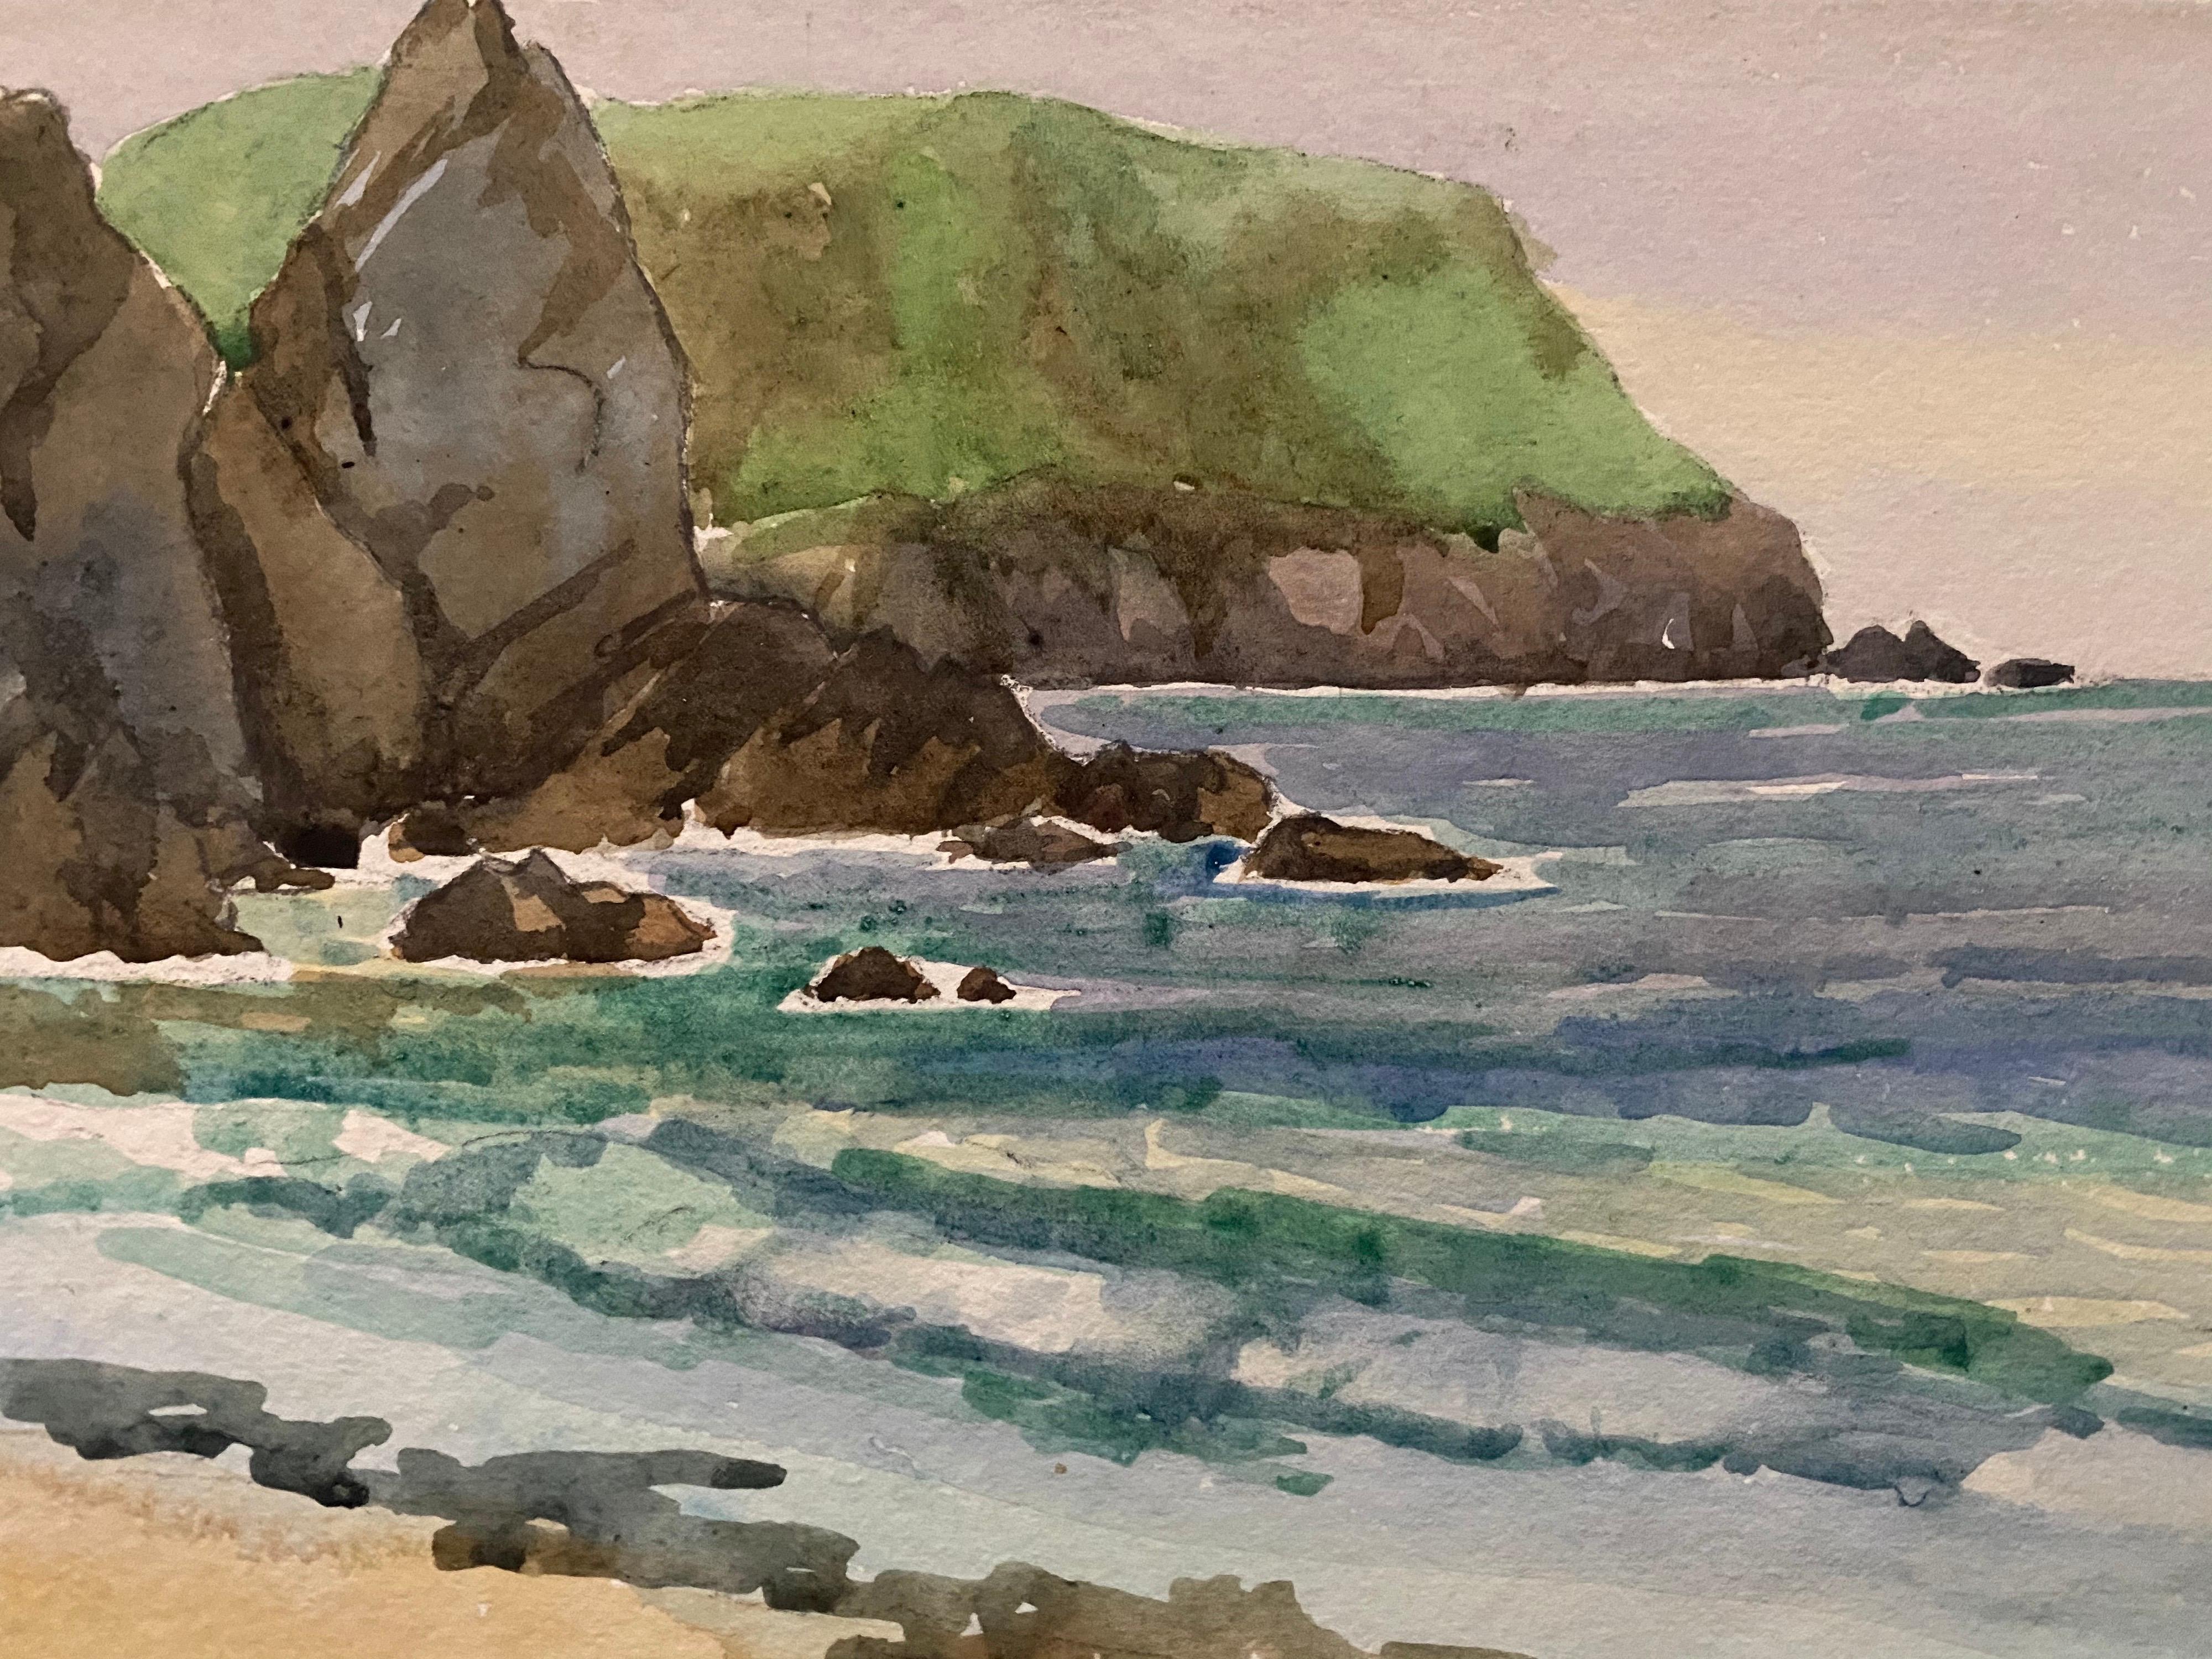 Vibrant sea.
English school, early 1900's.
Original watercolor painting on artists paper, unframed.
Overall paper size: 7.75 x 11 inches.


From a large private collection of English watercolor paintings, all by the same hand, we offer this